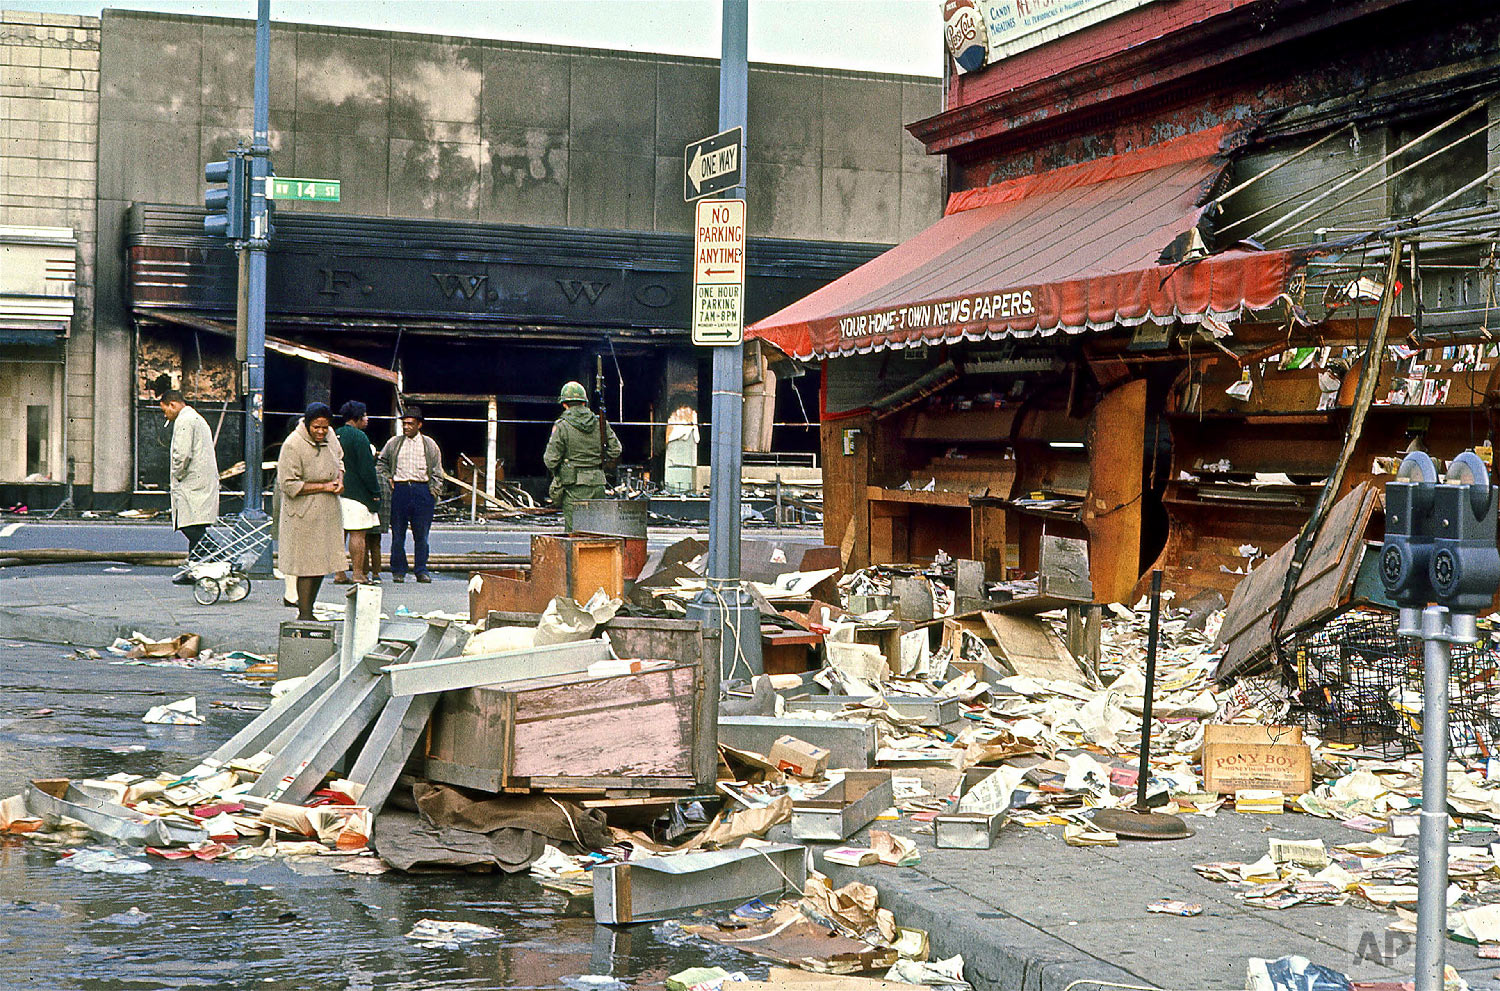  Torn-down newsstand on 14th and Kenyon Streets NW following rioting after the assassination of Dr. Martin Luther King, Jr., Saturday, April 6, 1968. (Photo/Darrell C. Crain/DC Public Library Specials Collections) 

 